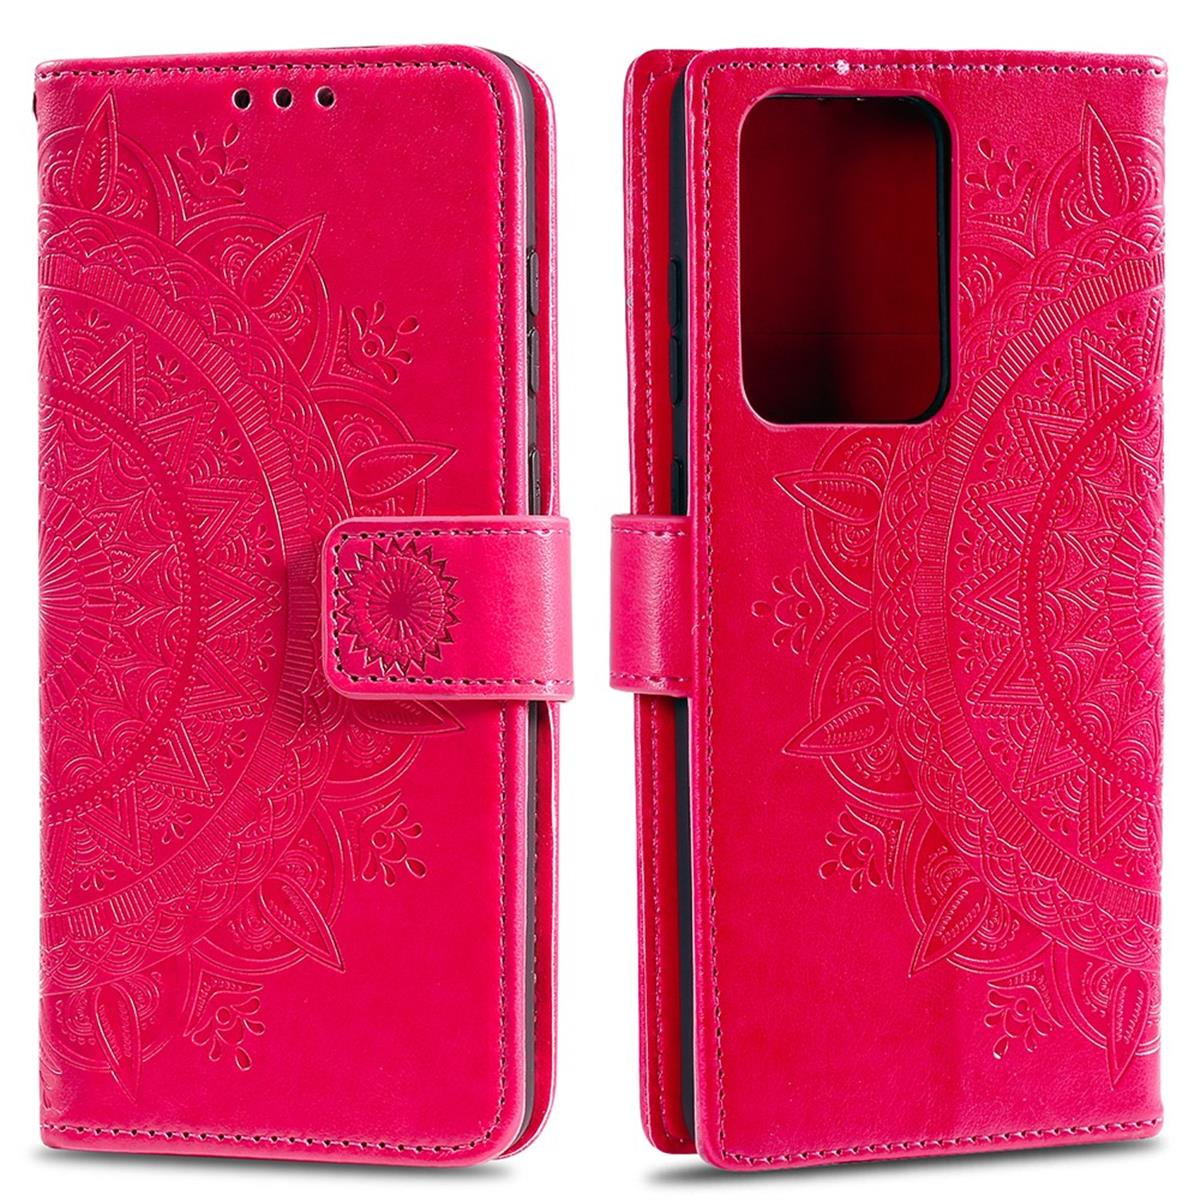 mit Bookcover, Klapphülle Mandala Ultra, Muster, COVERKINGZ Samsung, S20 Galaxy Pink